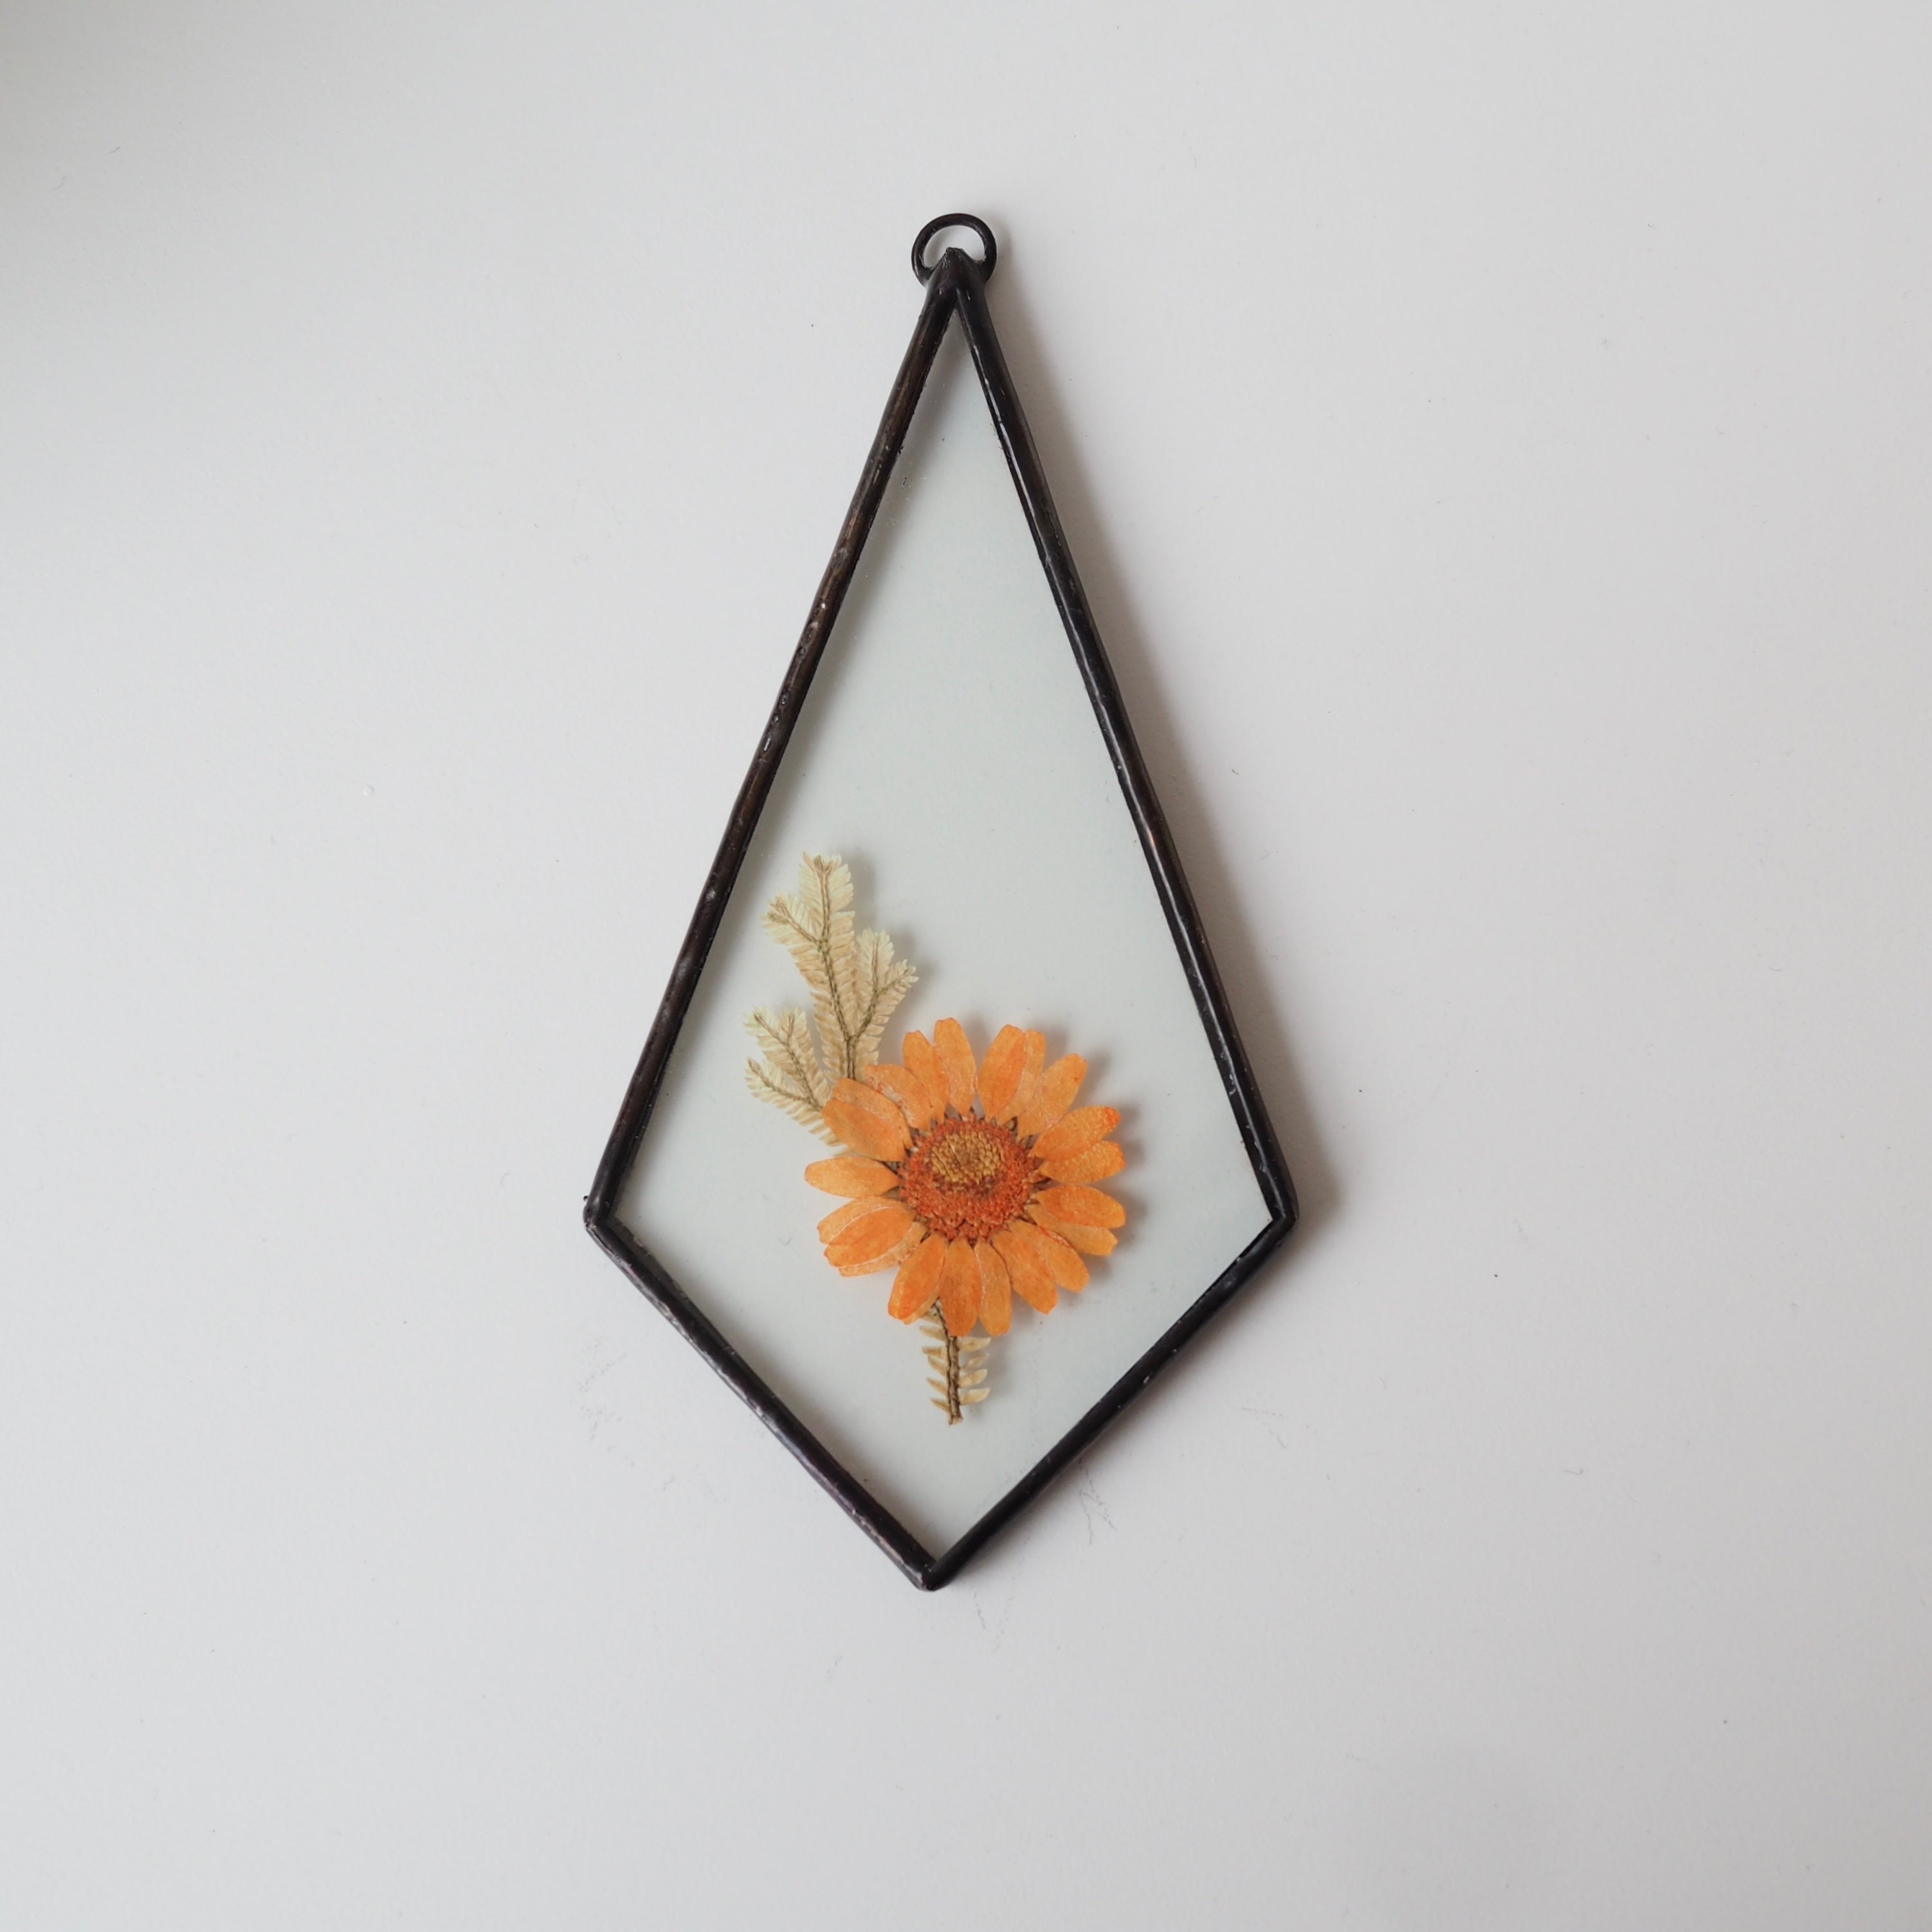 Pressed Flower Stained Glass